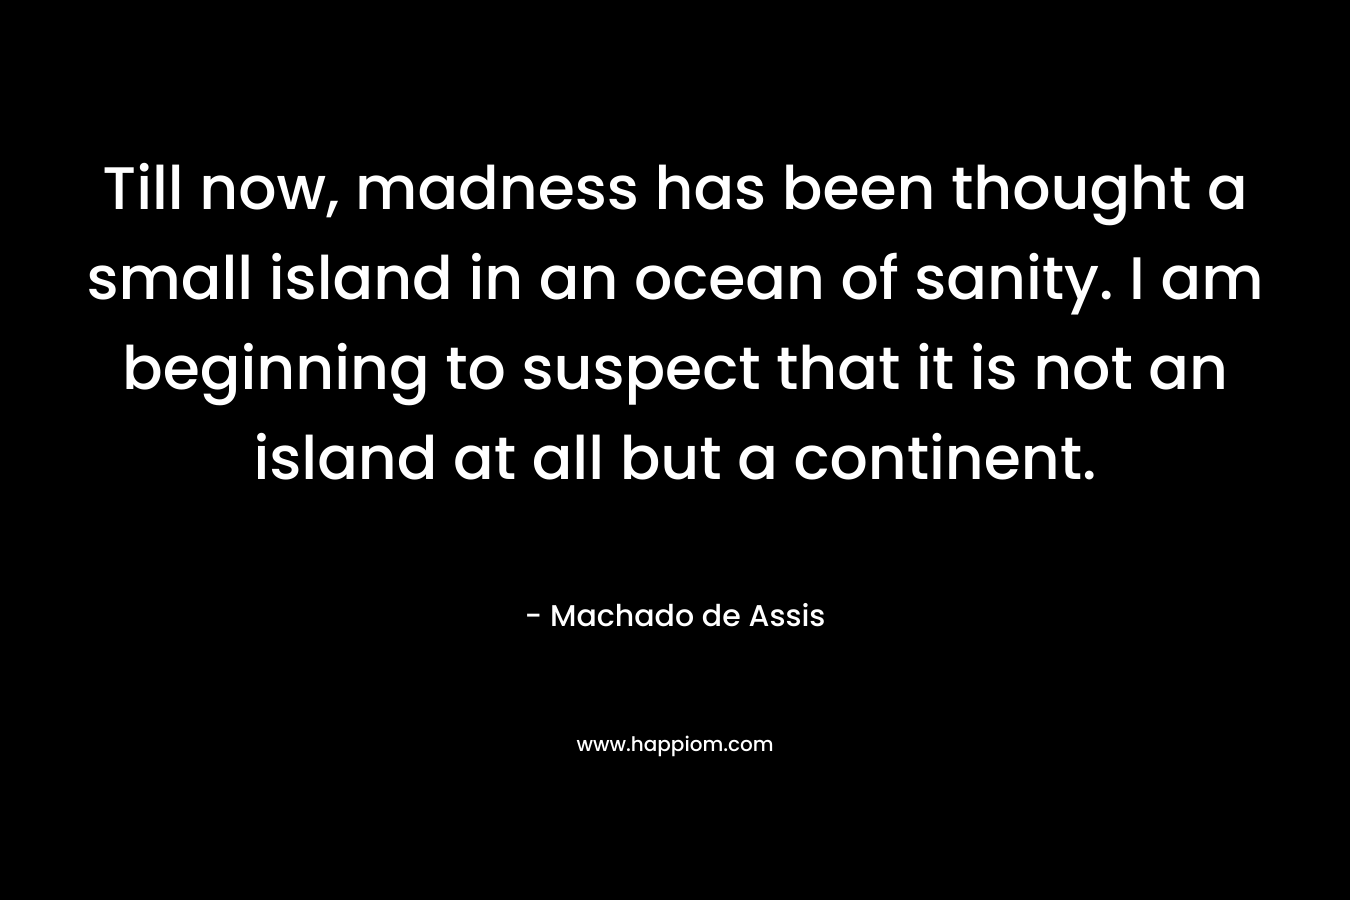 Till now, madness has been thought a small island in an ocean of sanity. I am beginning to suspect that it is not an island at all but a continent. – Machado de Assis